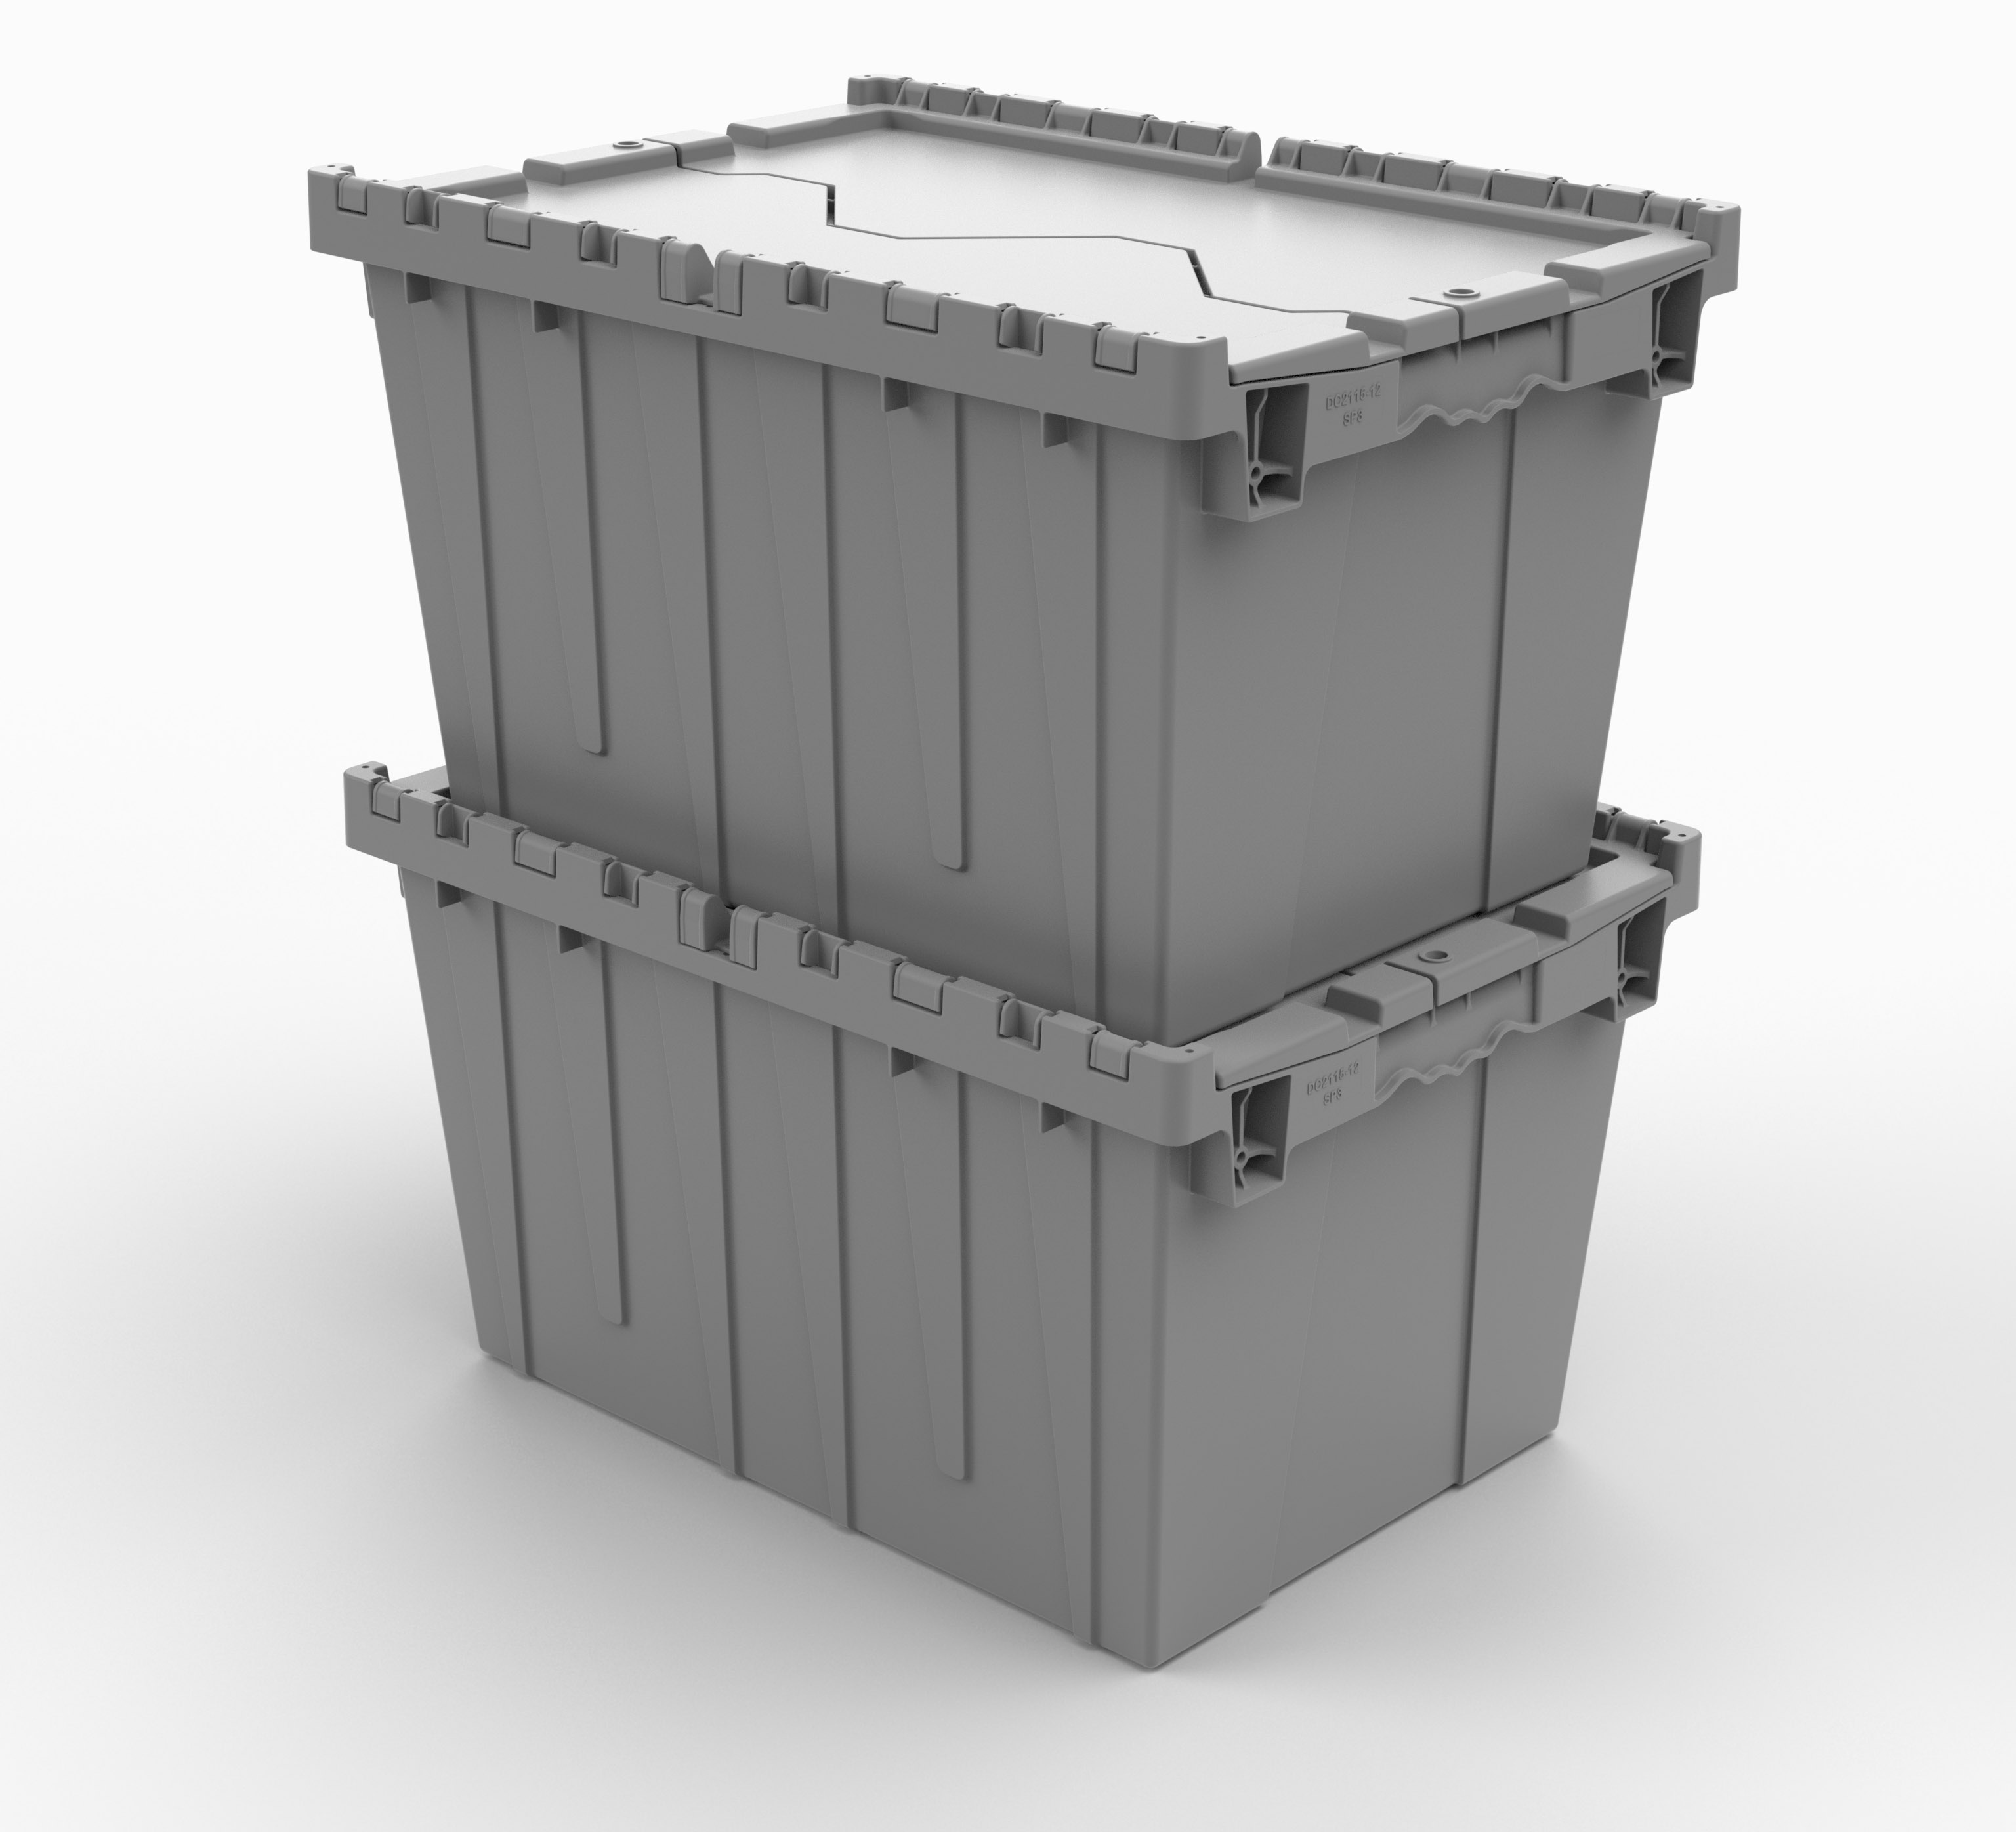 DC 2115-12 plastic hinge totes stacked